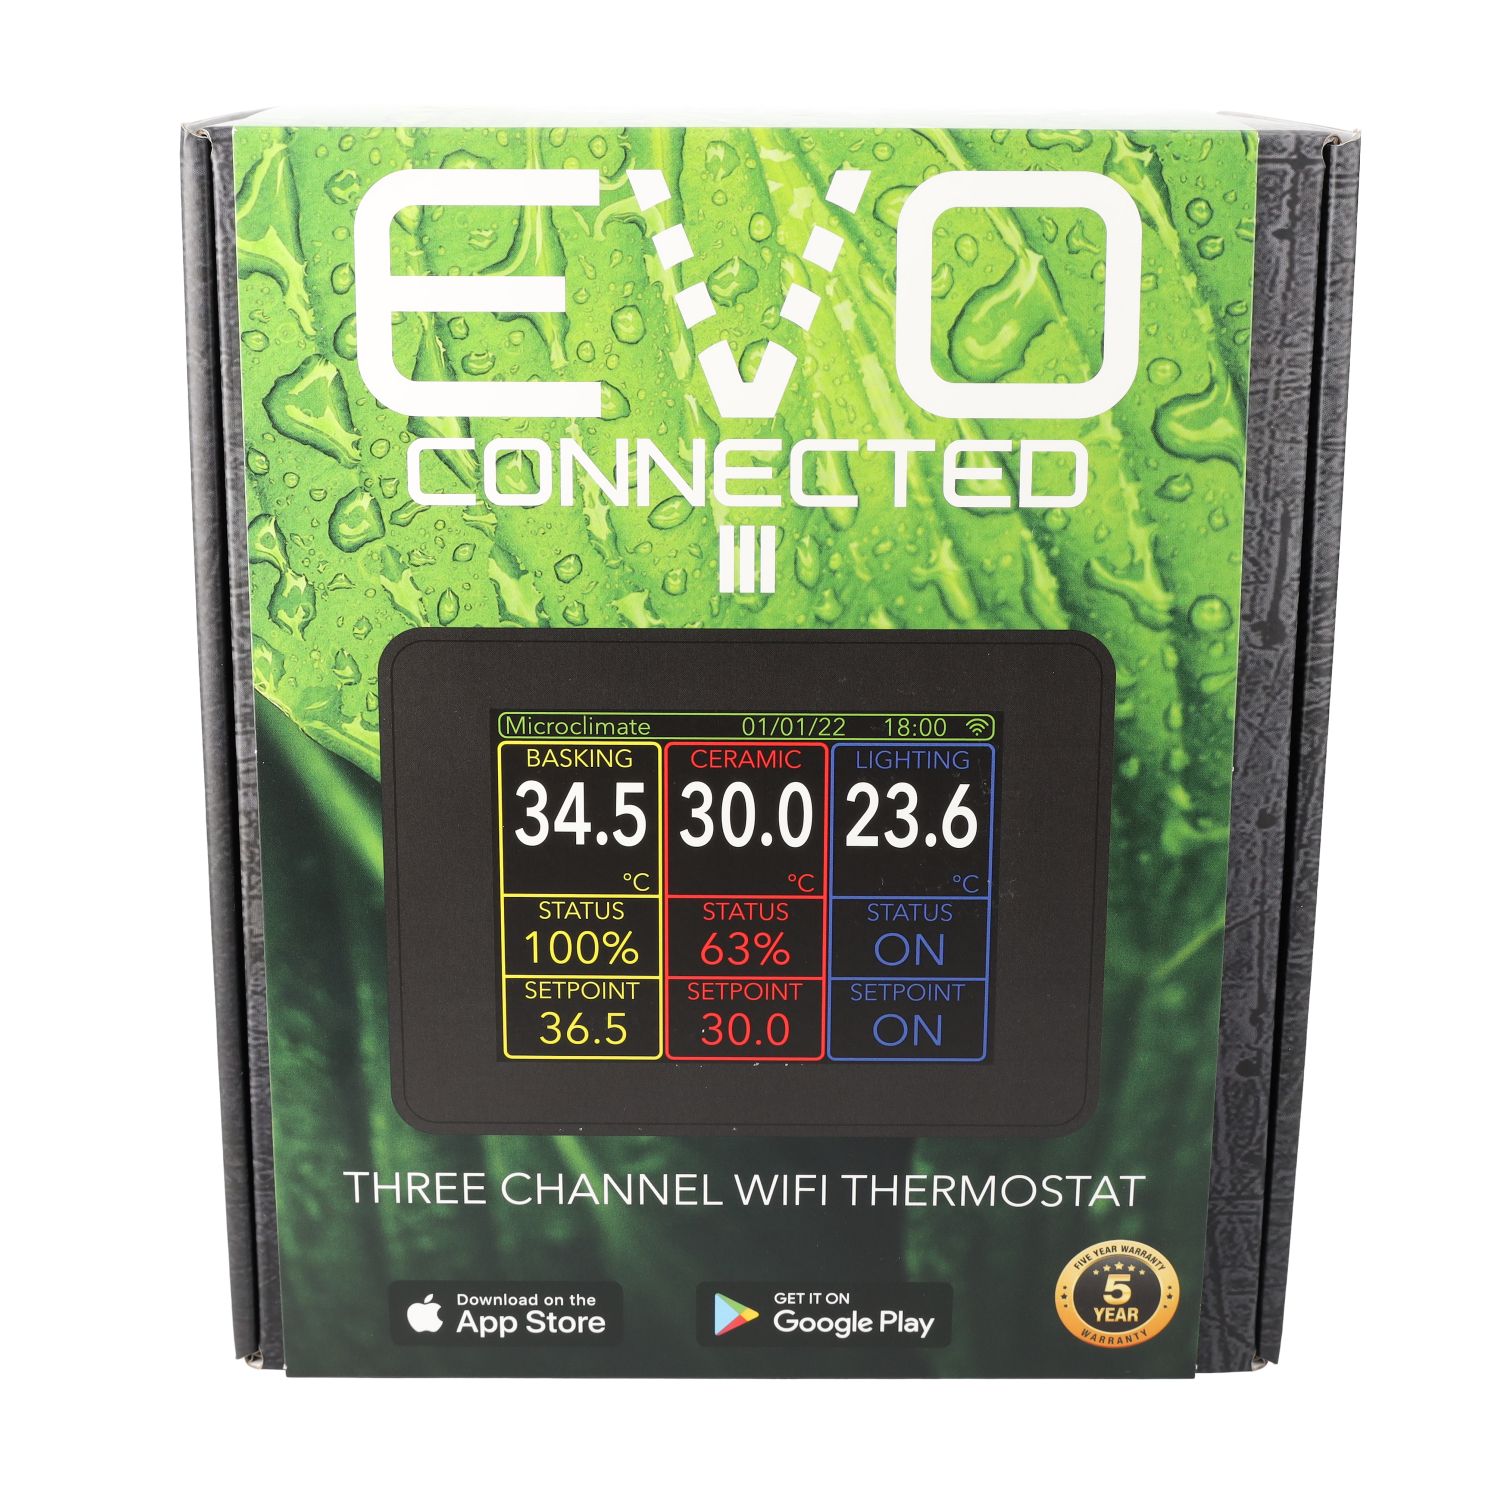 Microclimate EVO Connected 3